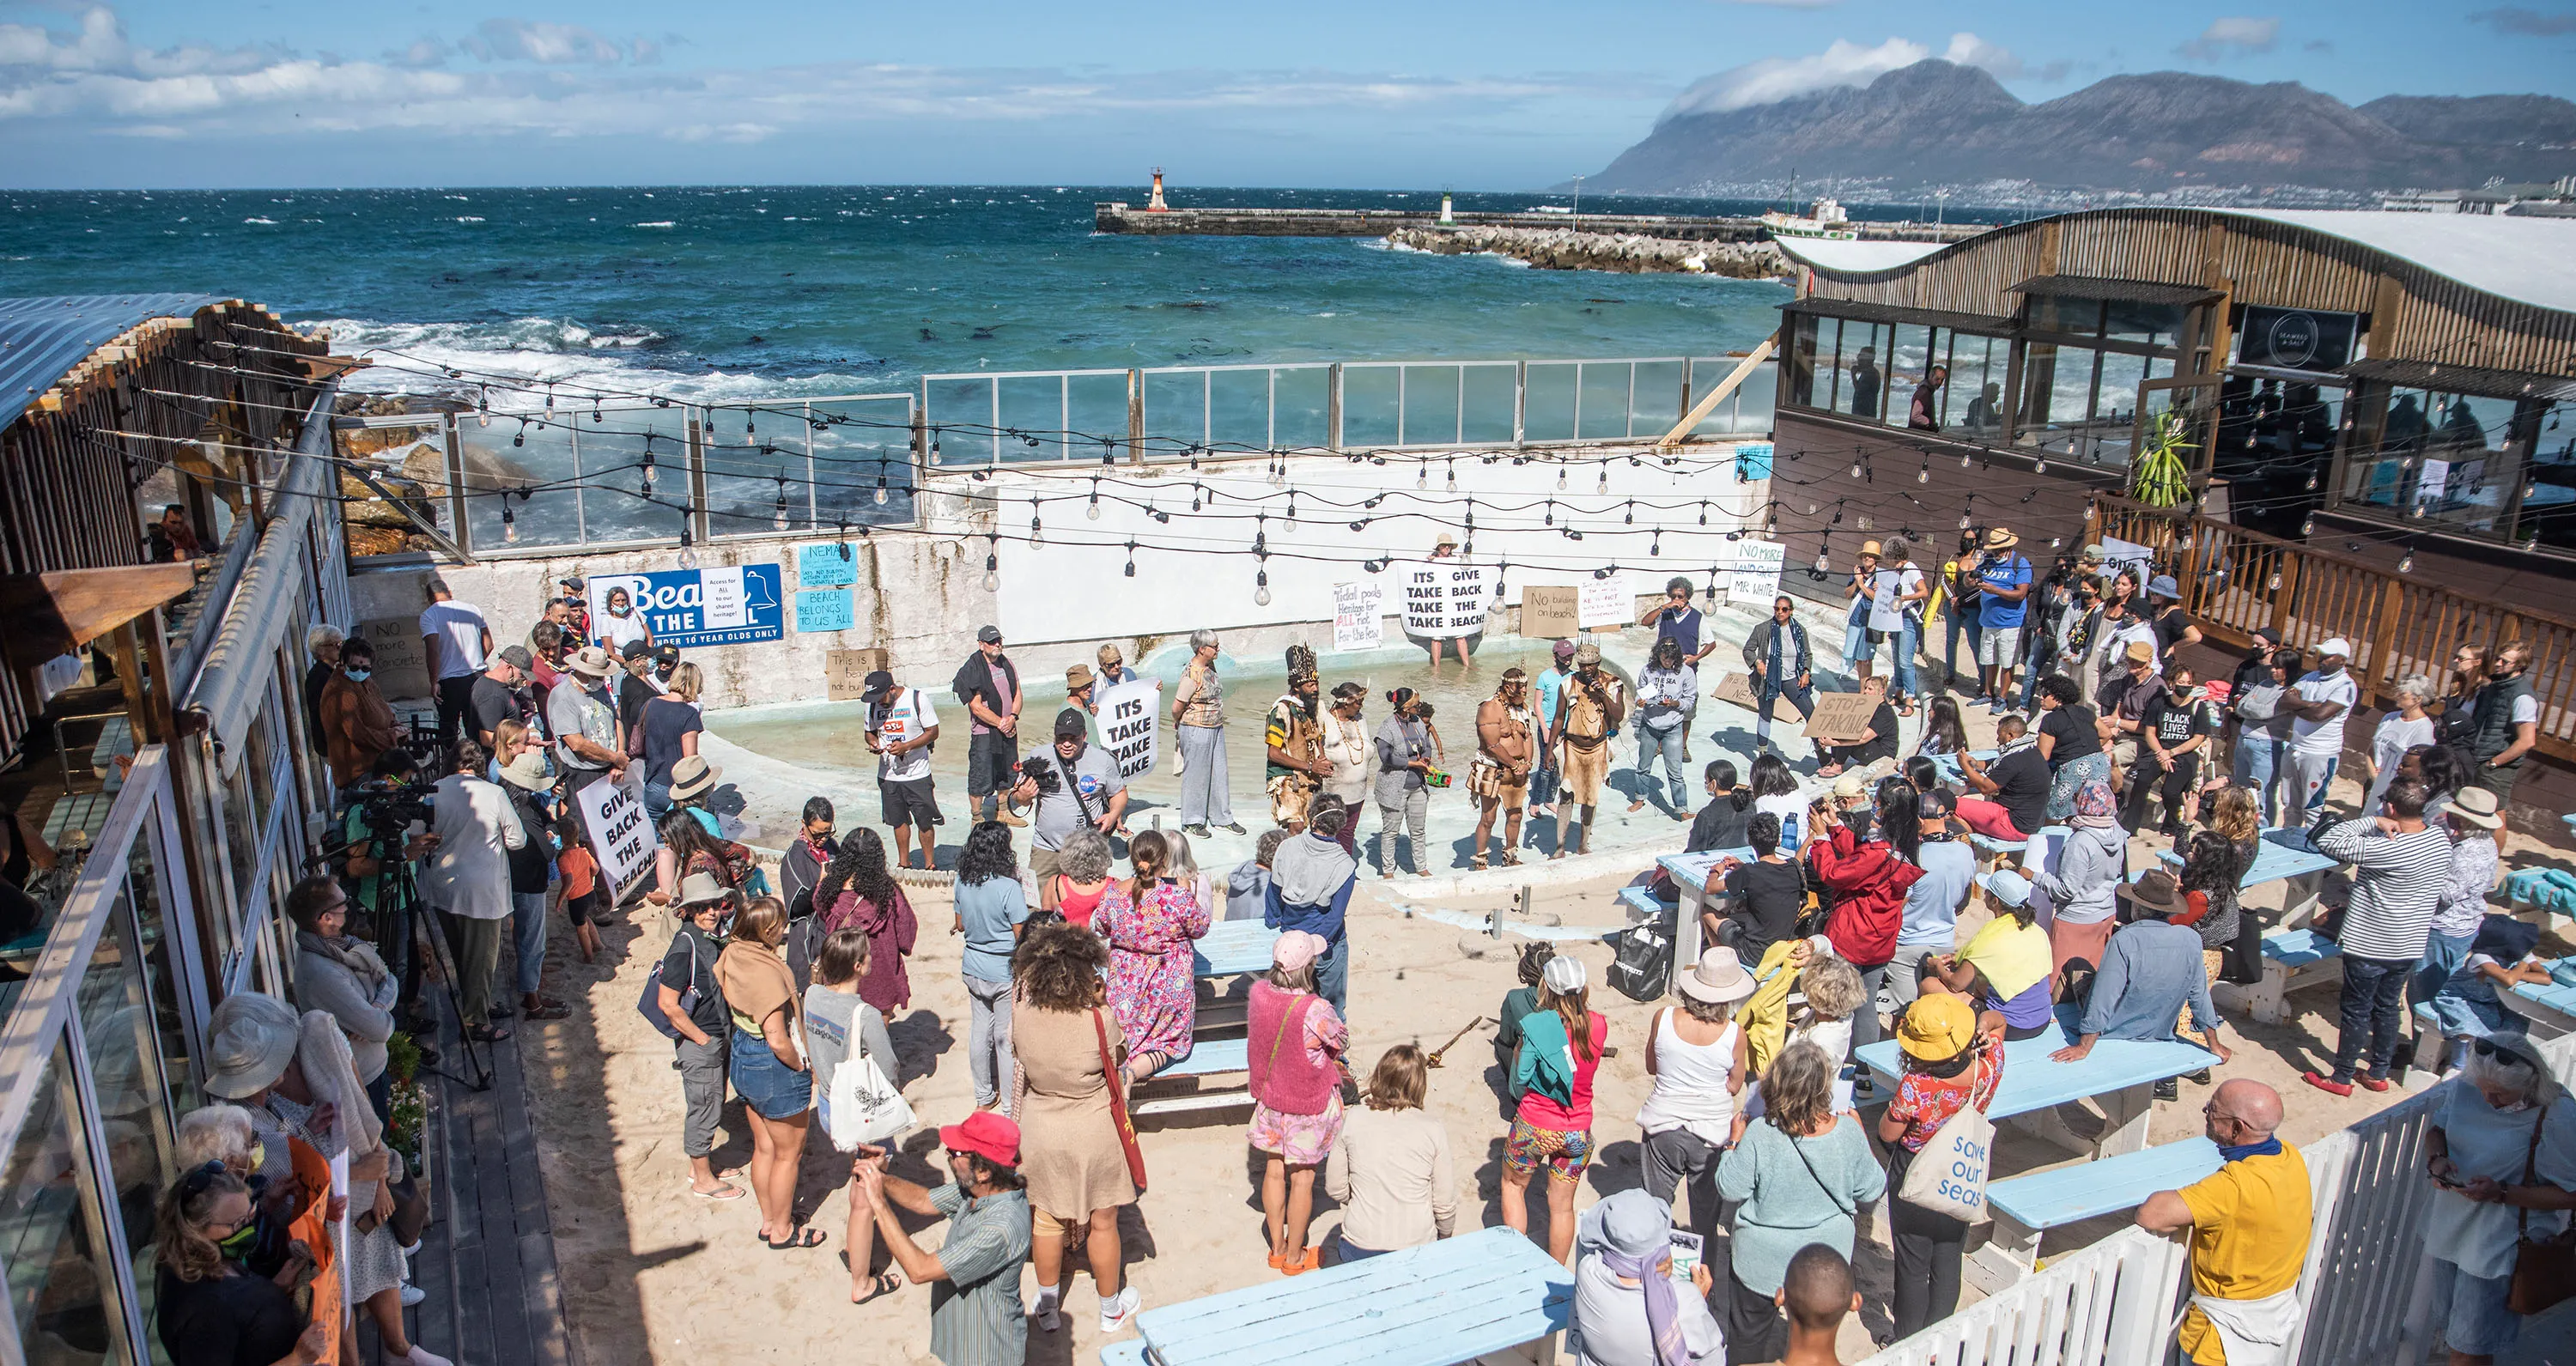 Kalk Bay restaurant owner halts expansion after outcry from residents and  intervention by city Kalk Bay restaurant owner halts expansion after outcry  from residents and intervention by city